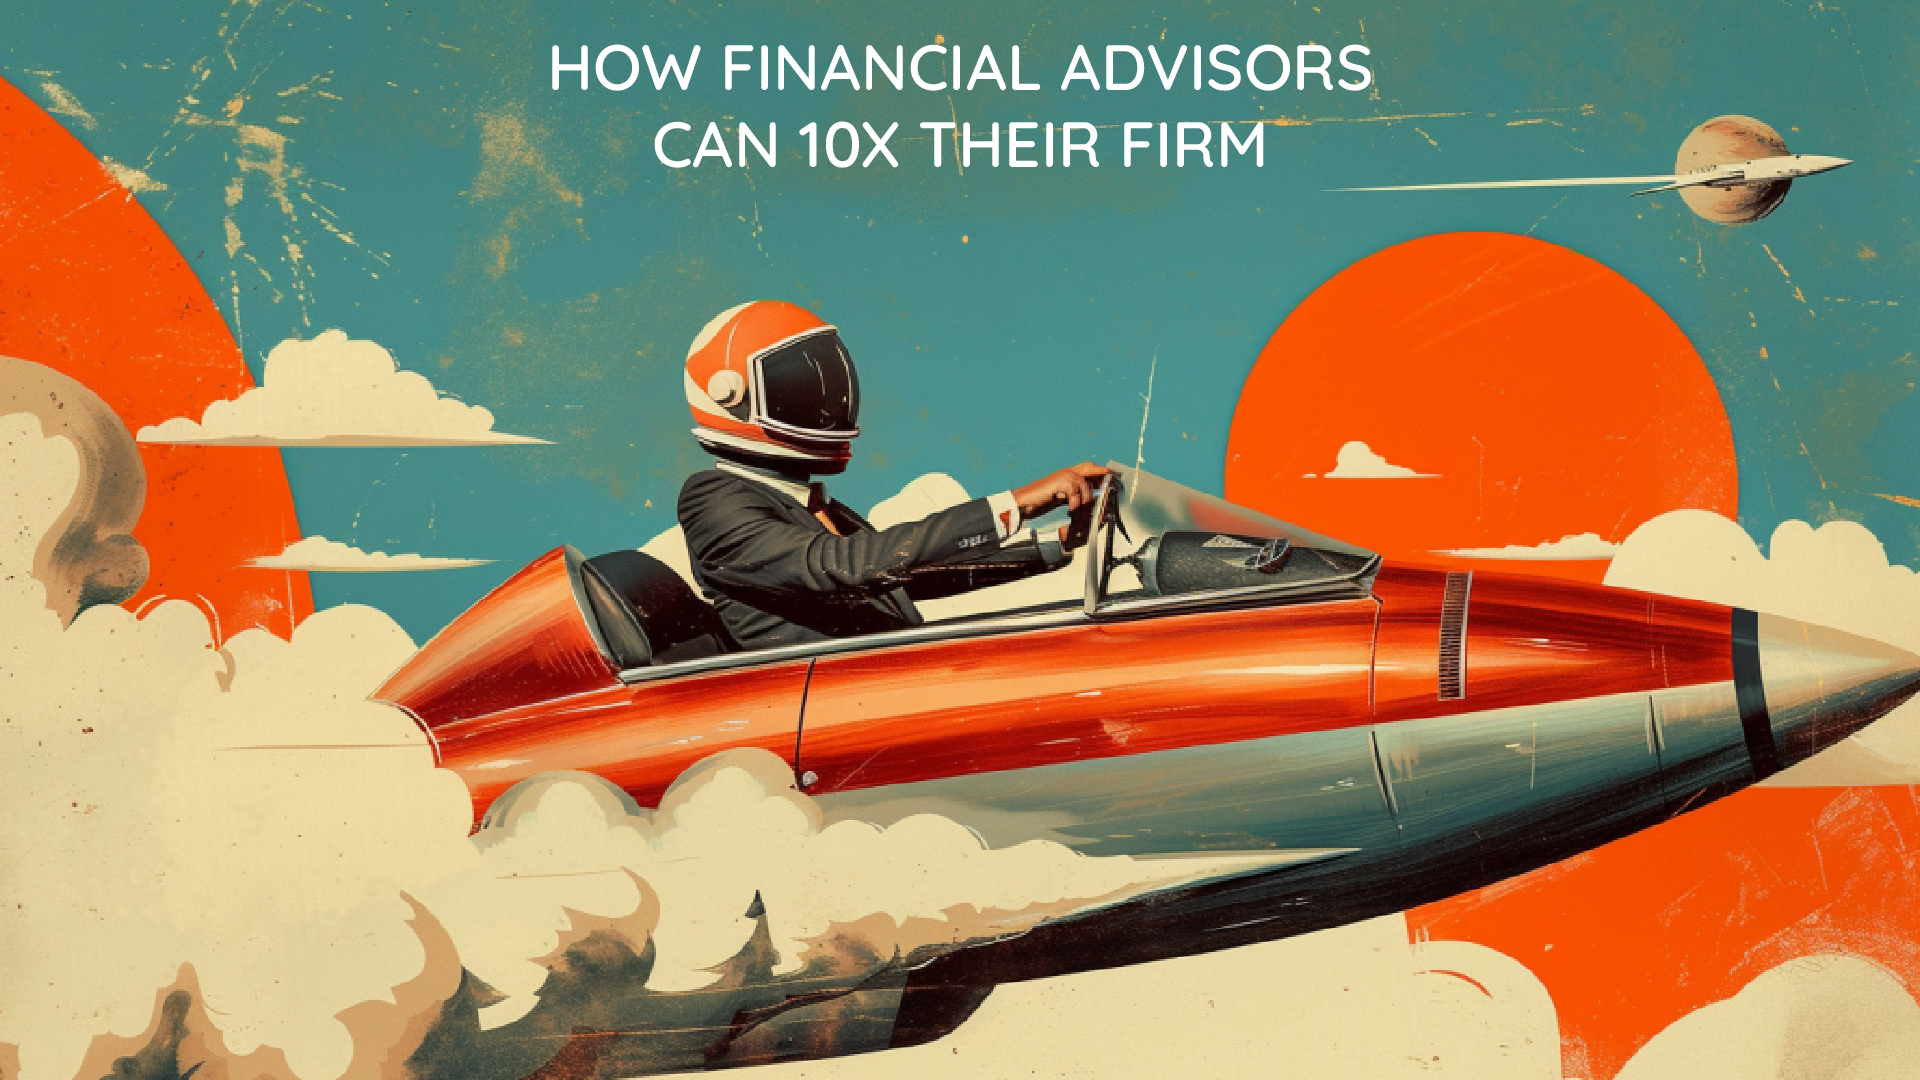 How Financial Advisors Can 10x Their Firm